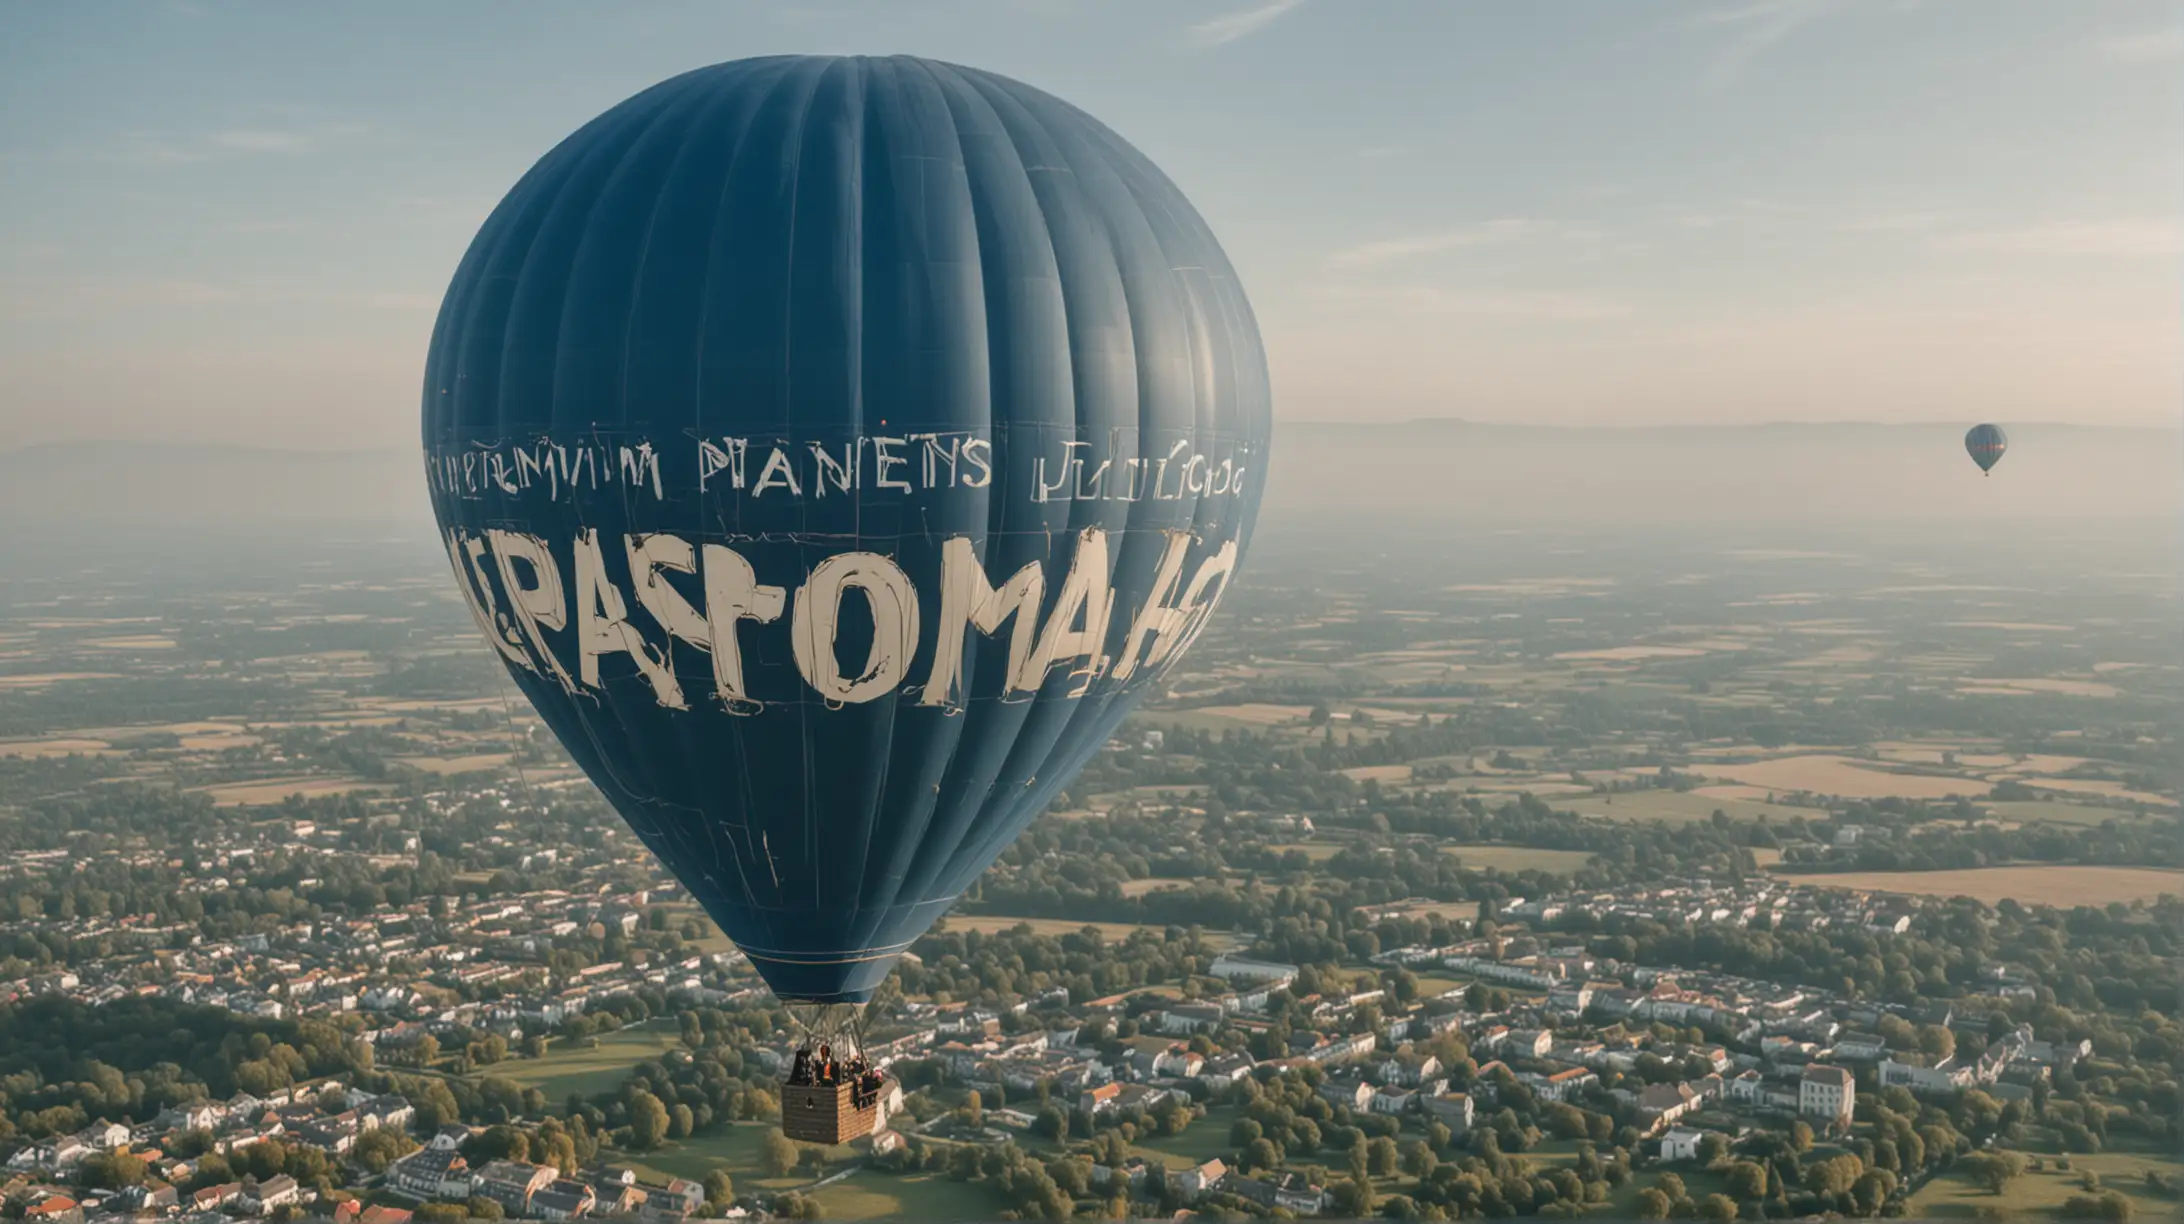 Blue Air Balloon Drifting Away with PANORAMAAM Letters